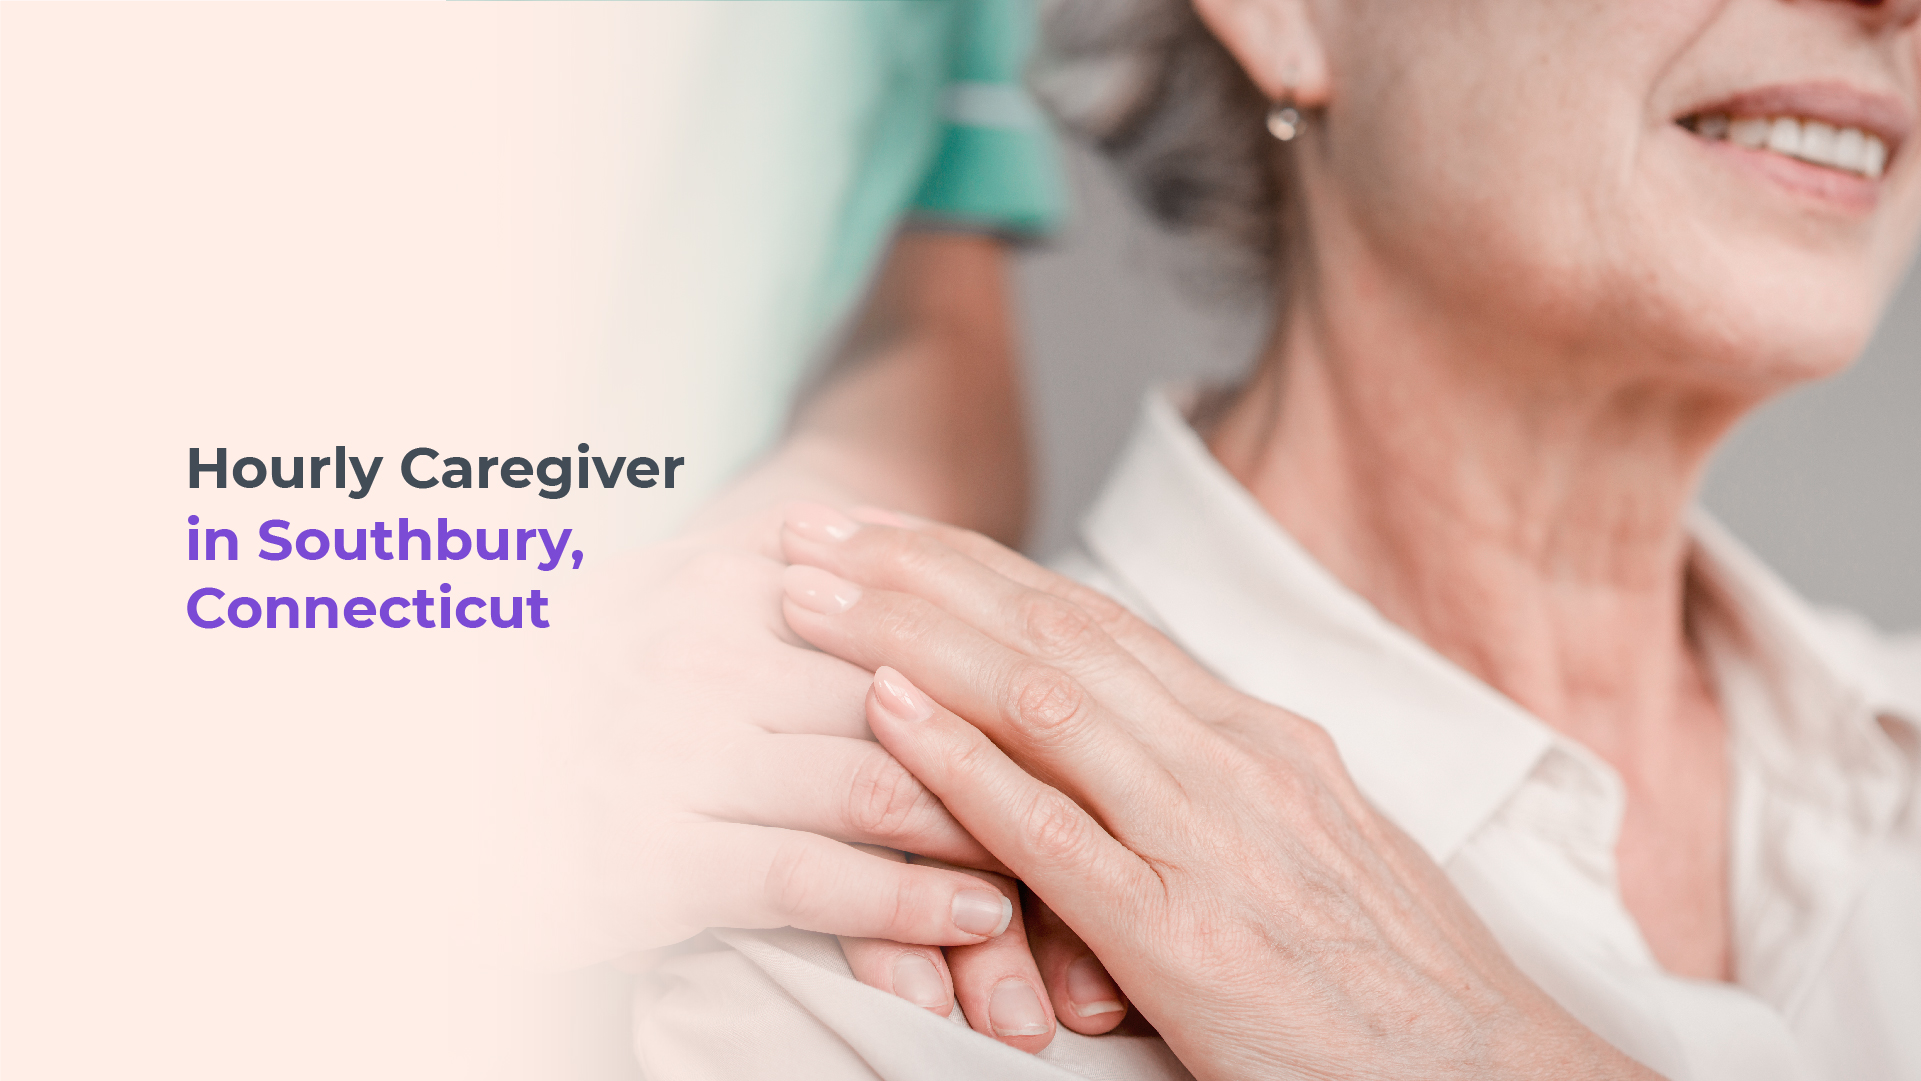 Hourly Caregivers in Southbury Connecticut